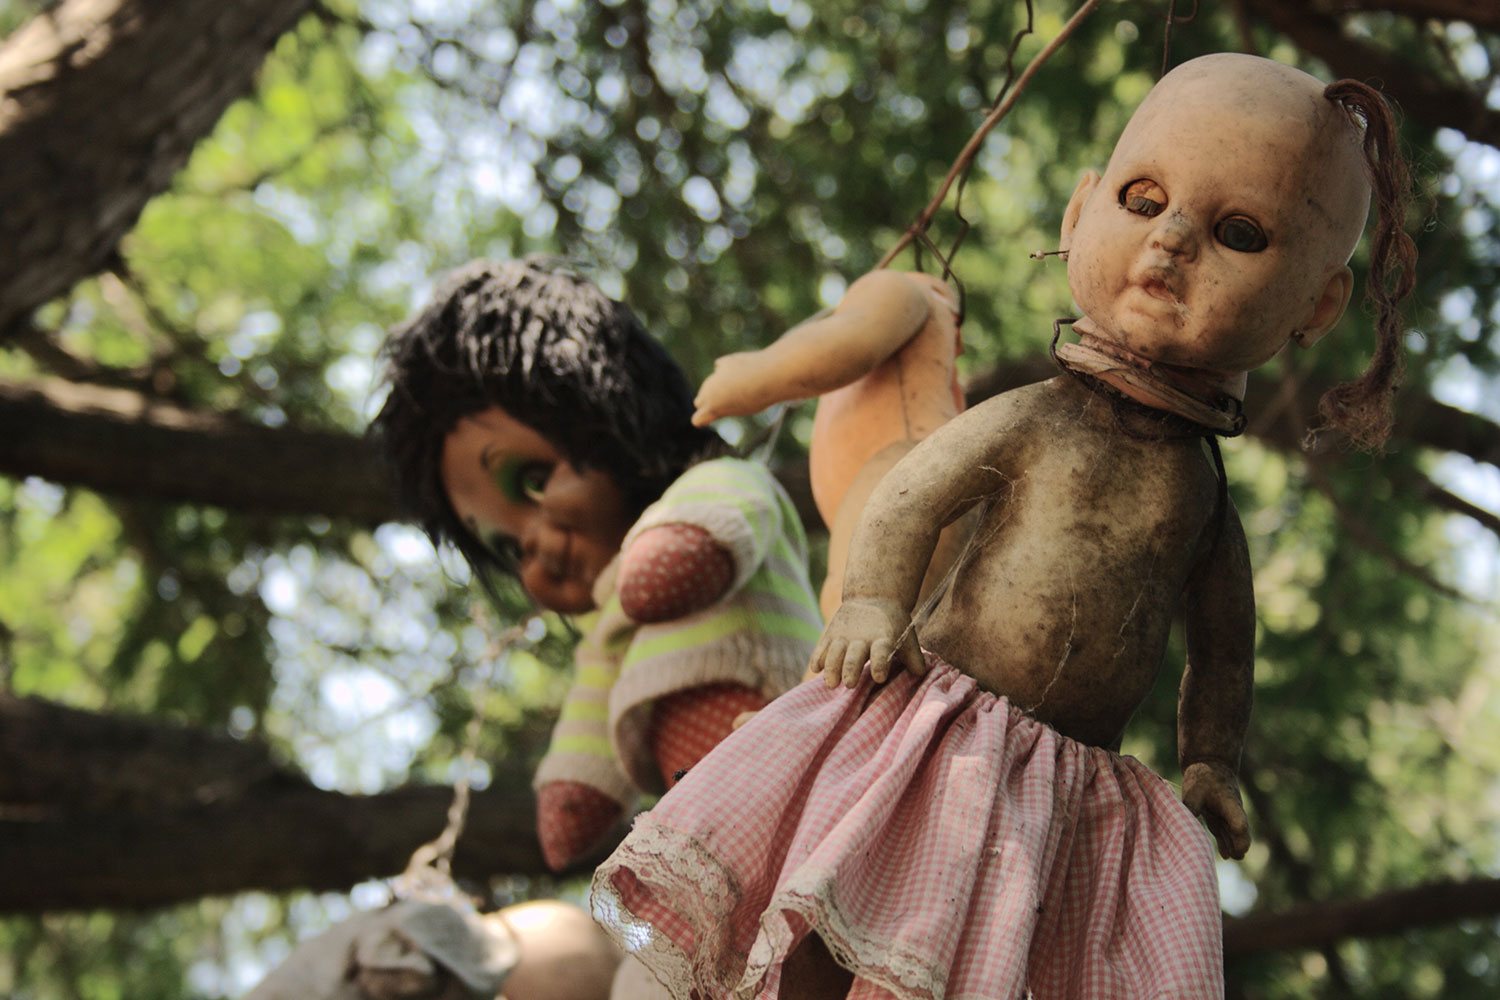 Creepiest places: Island of the Dolls 